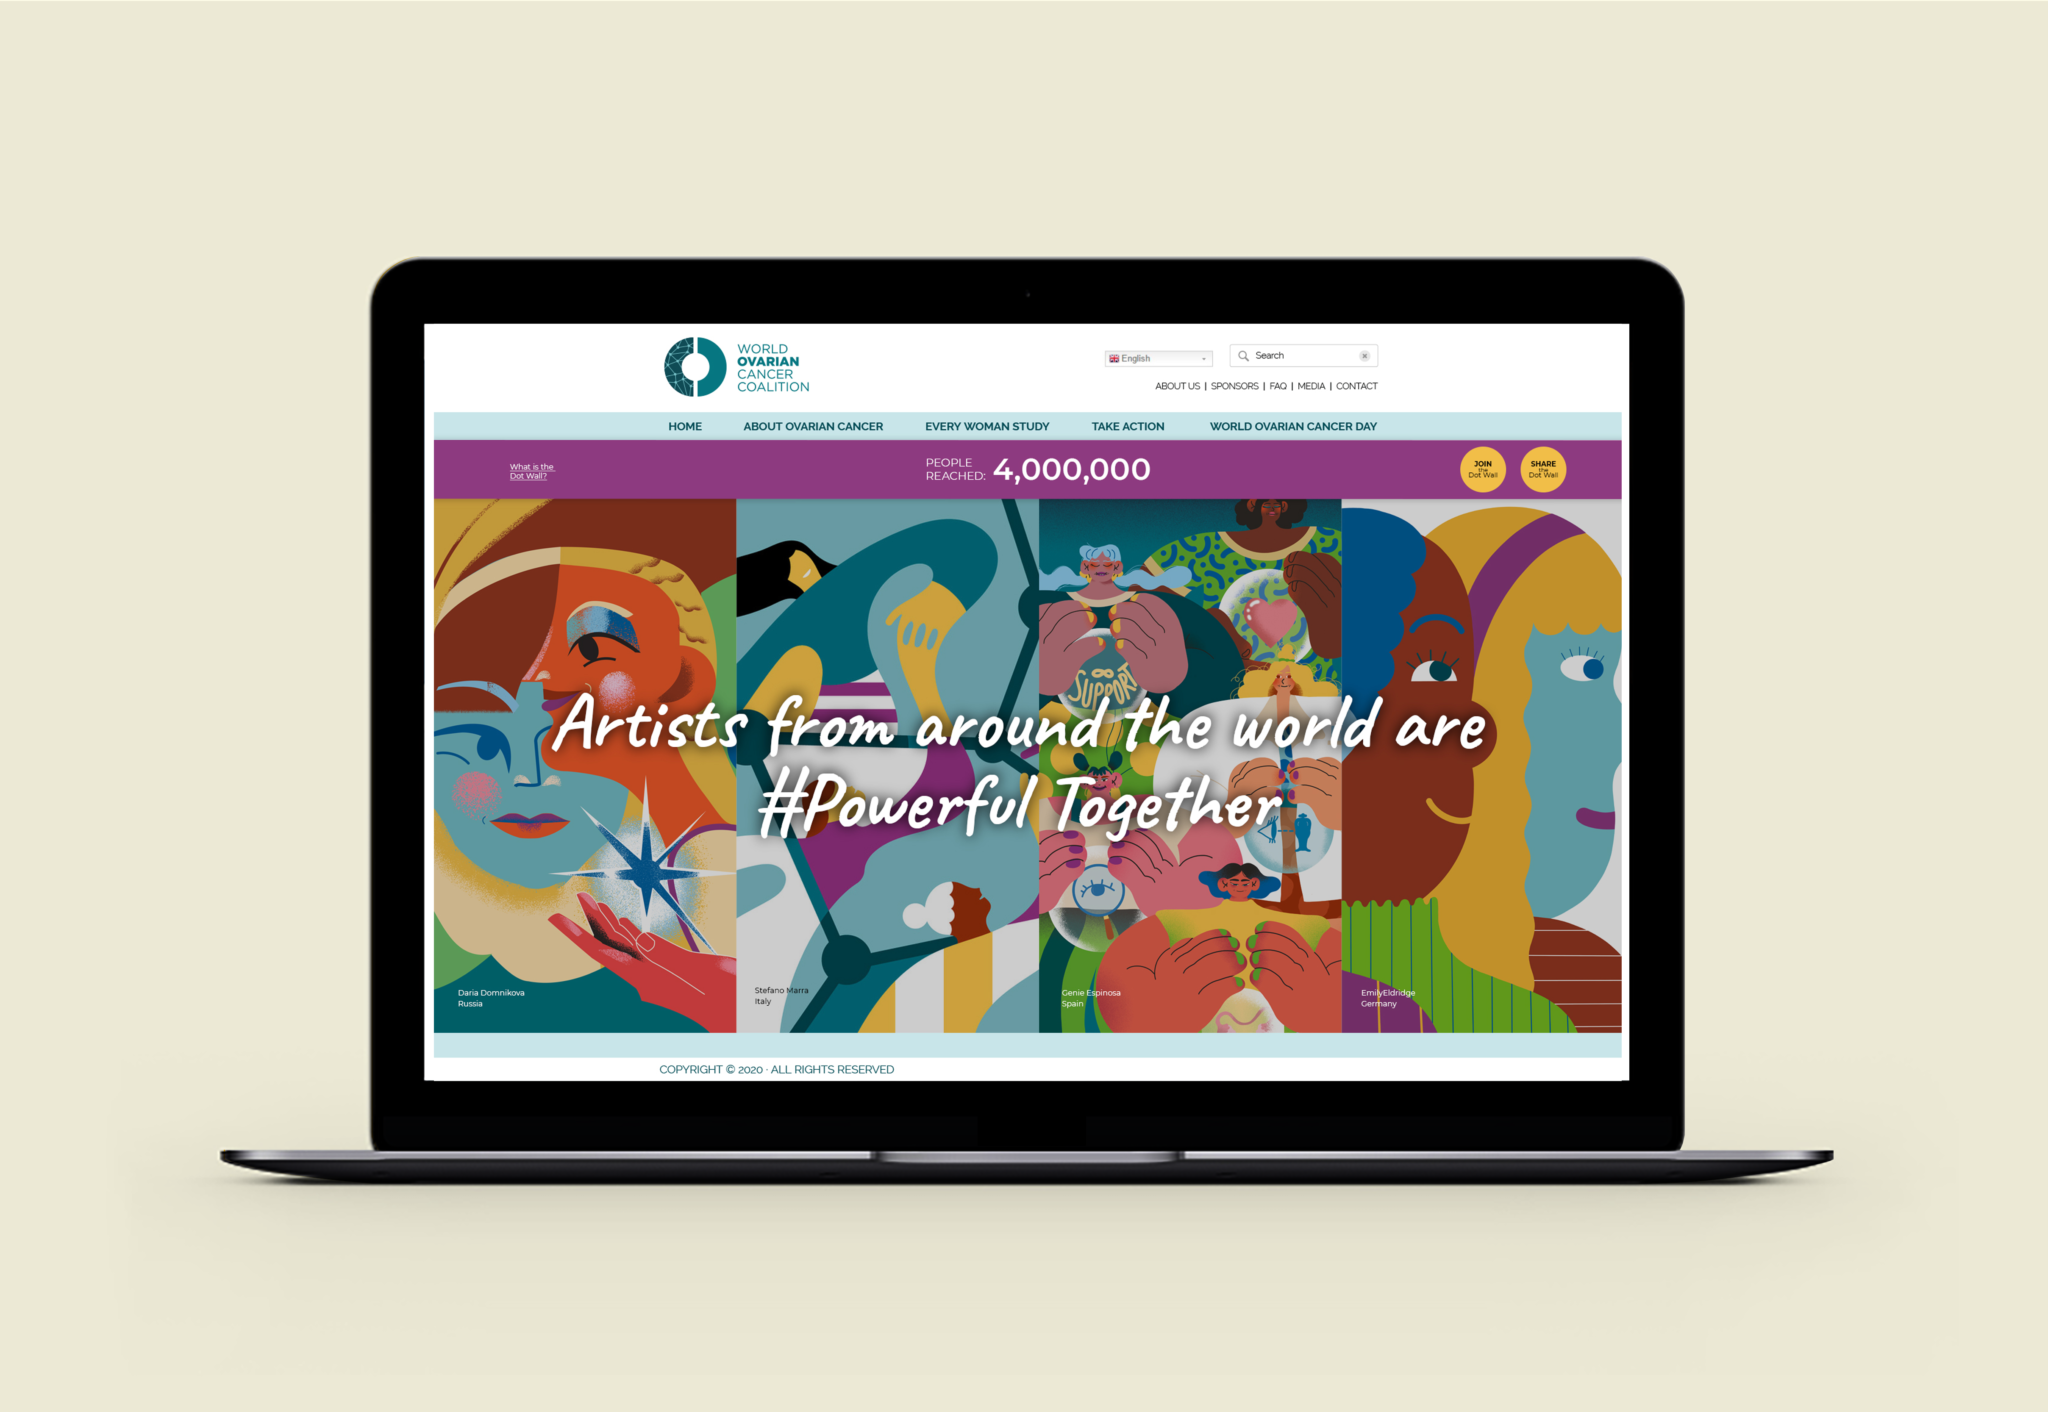 World Ovarian Cancer Coalition campaign website on laptop